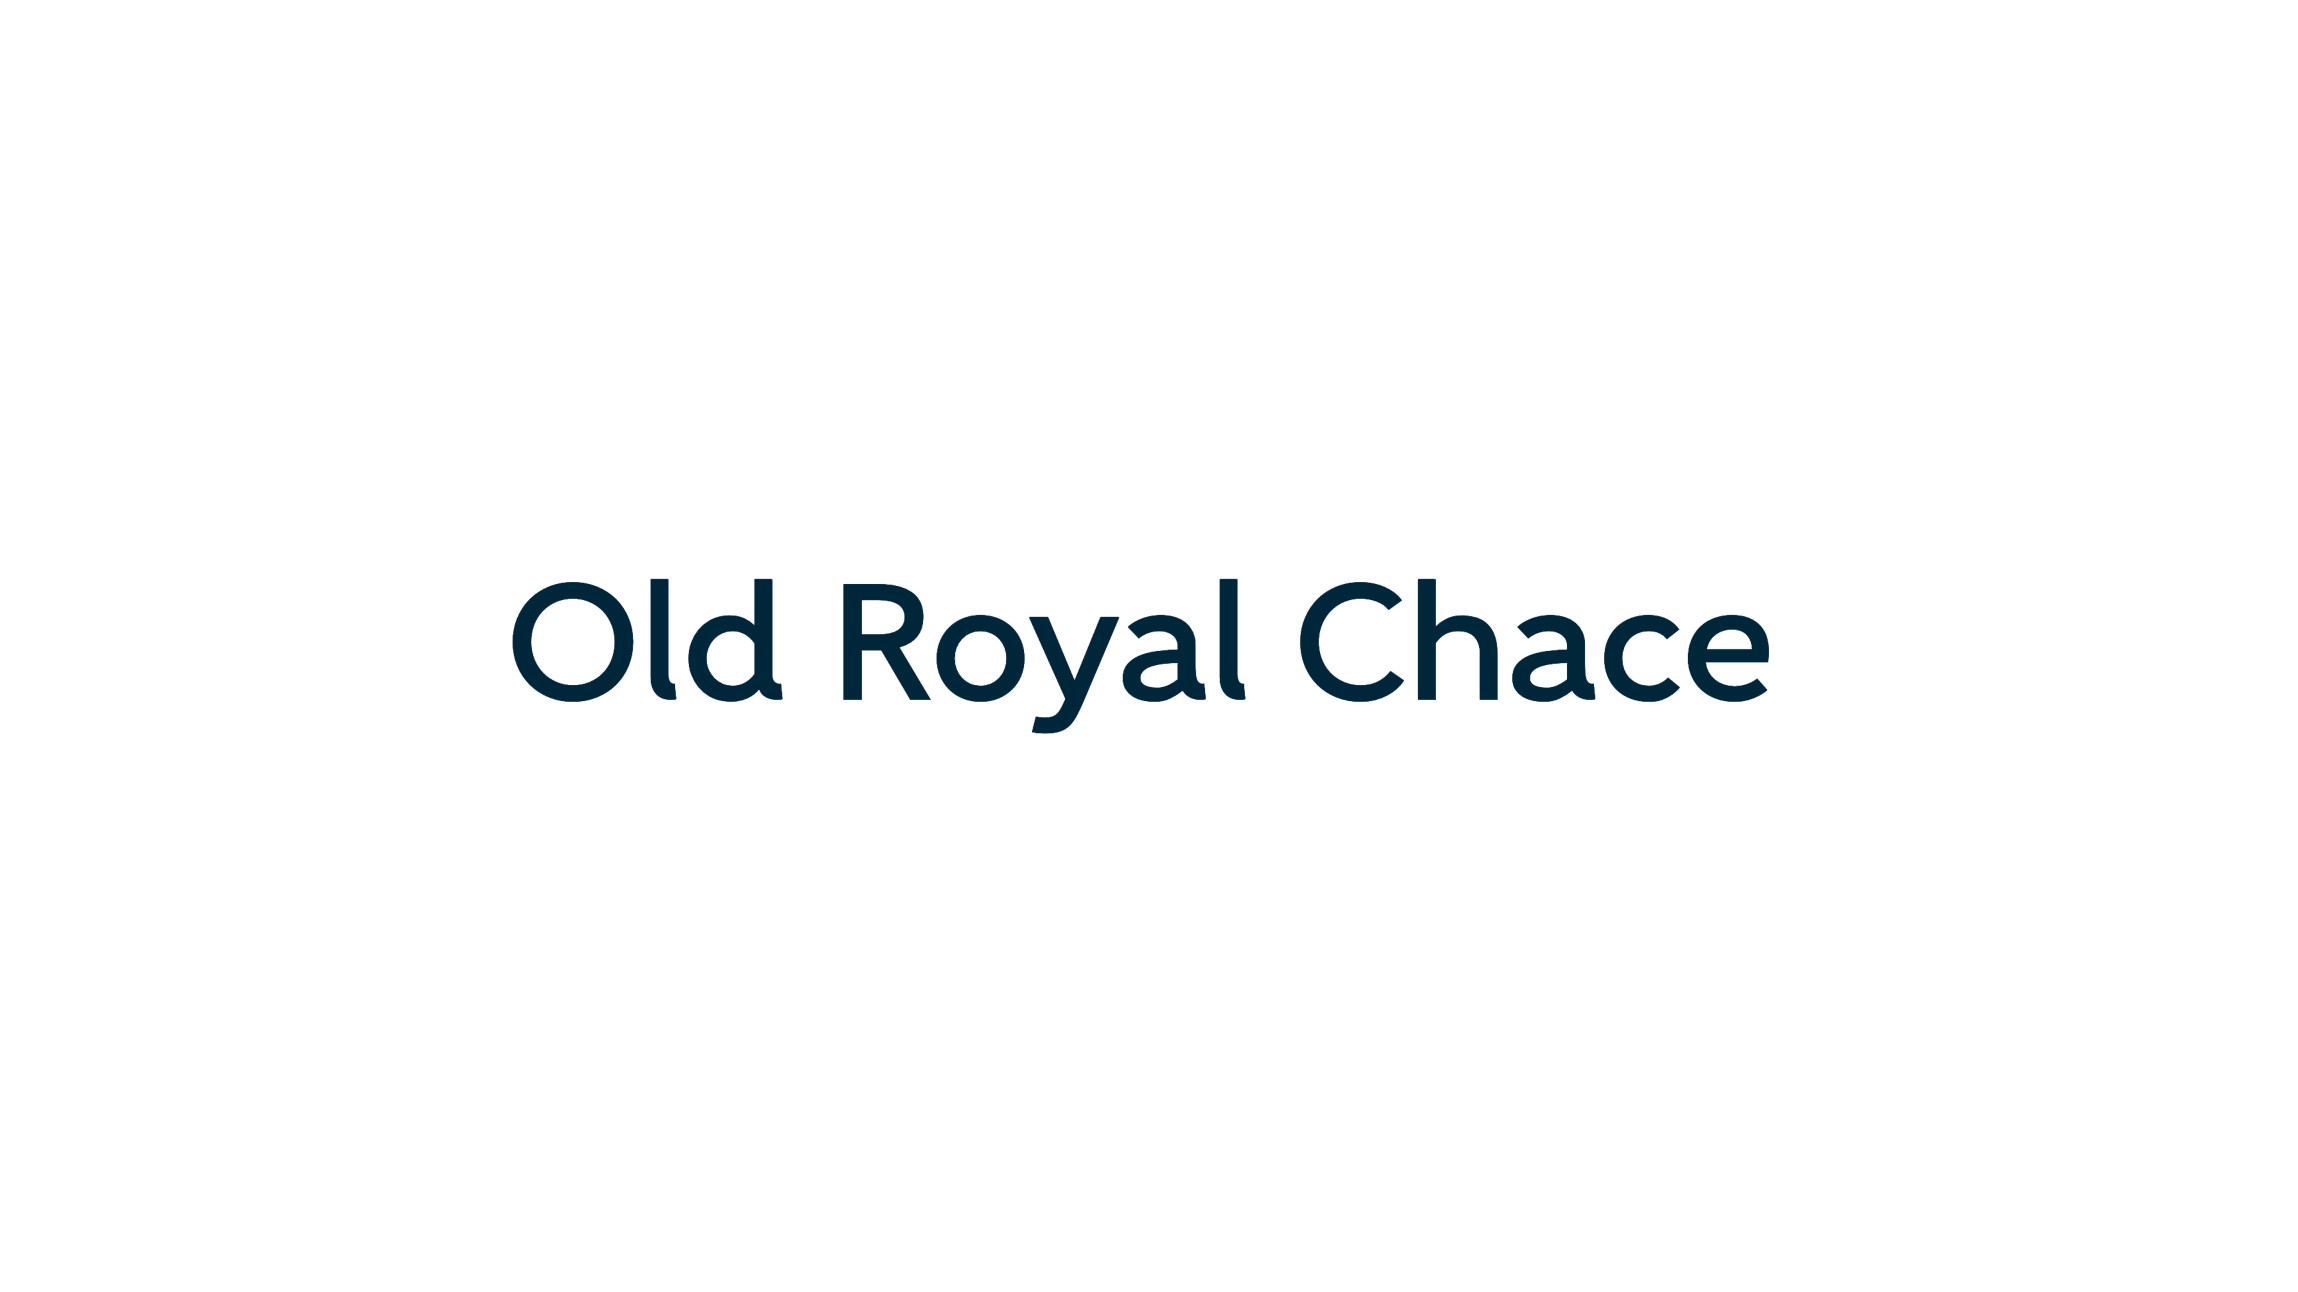 Old Royal Chace development by Bellway.